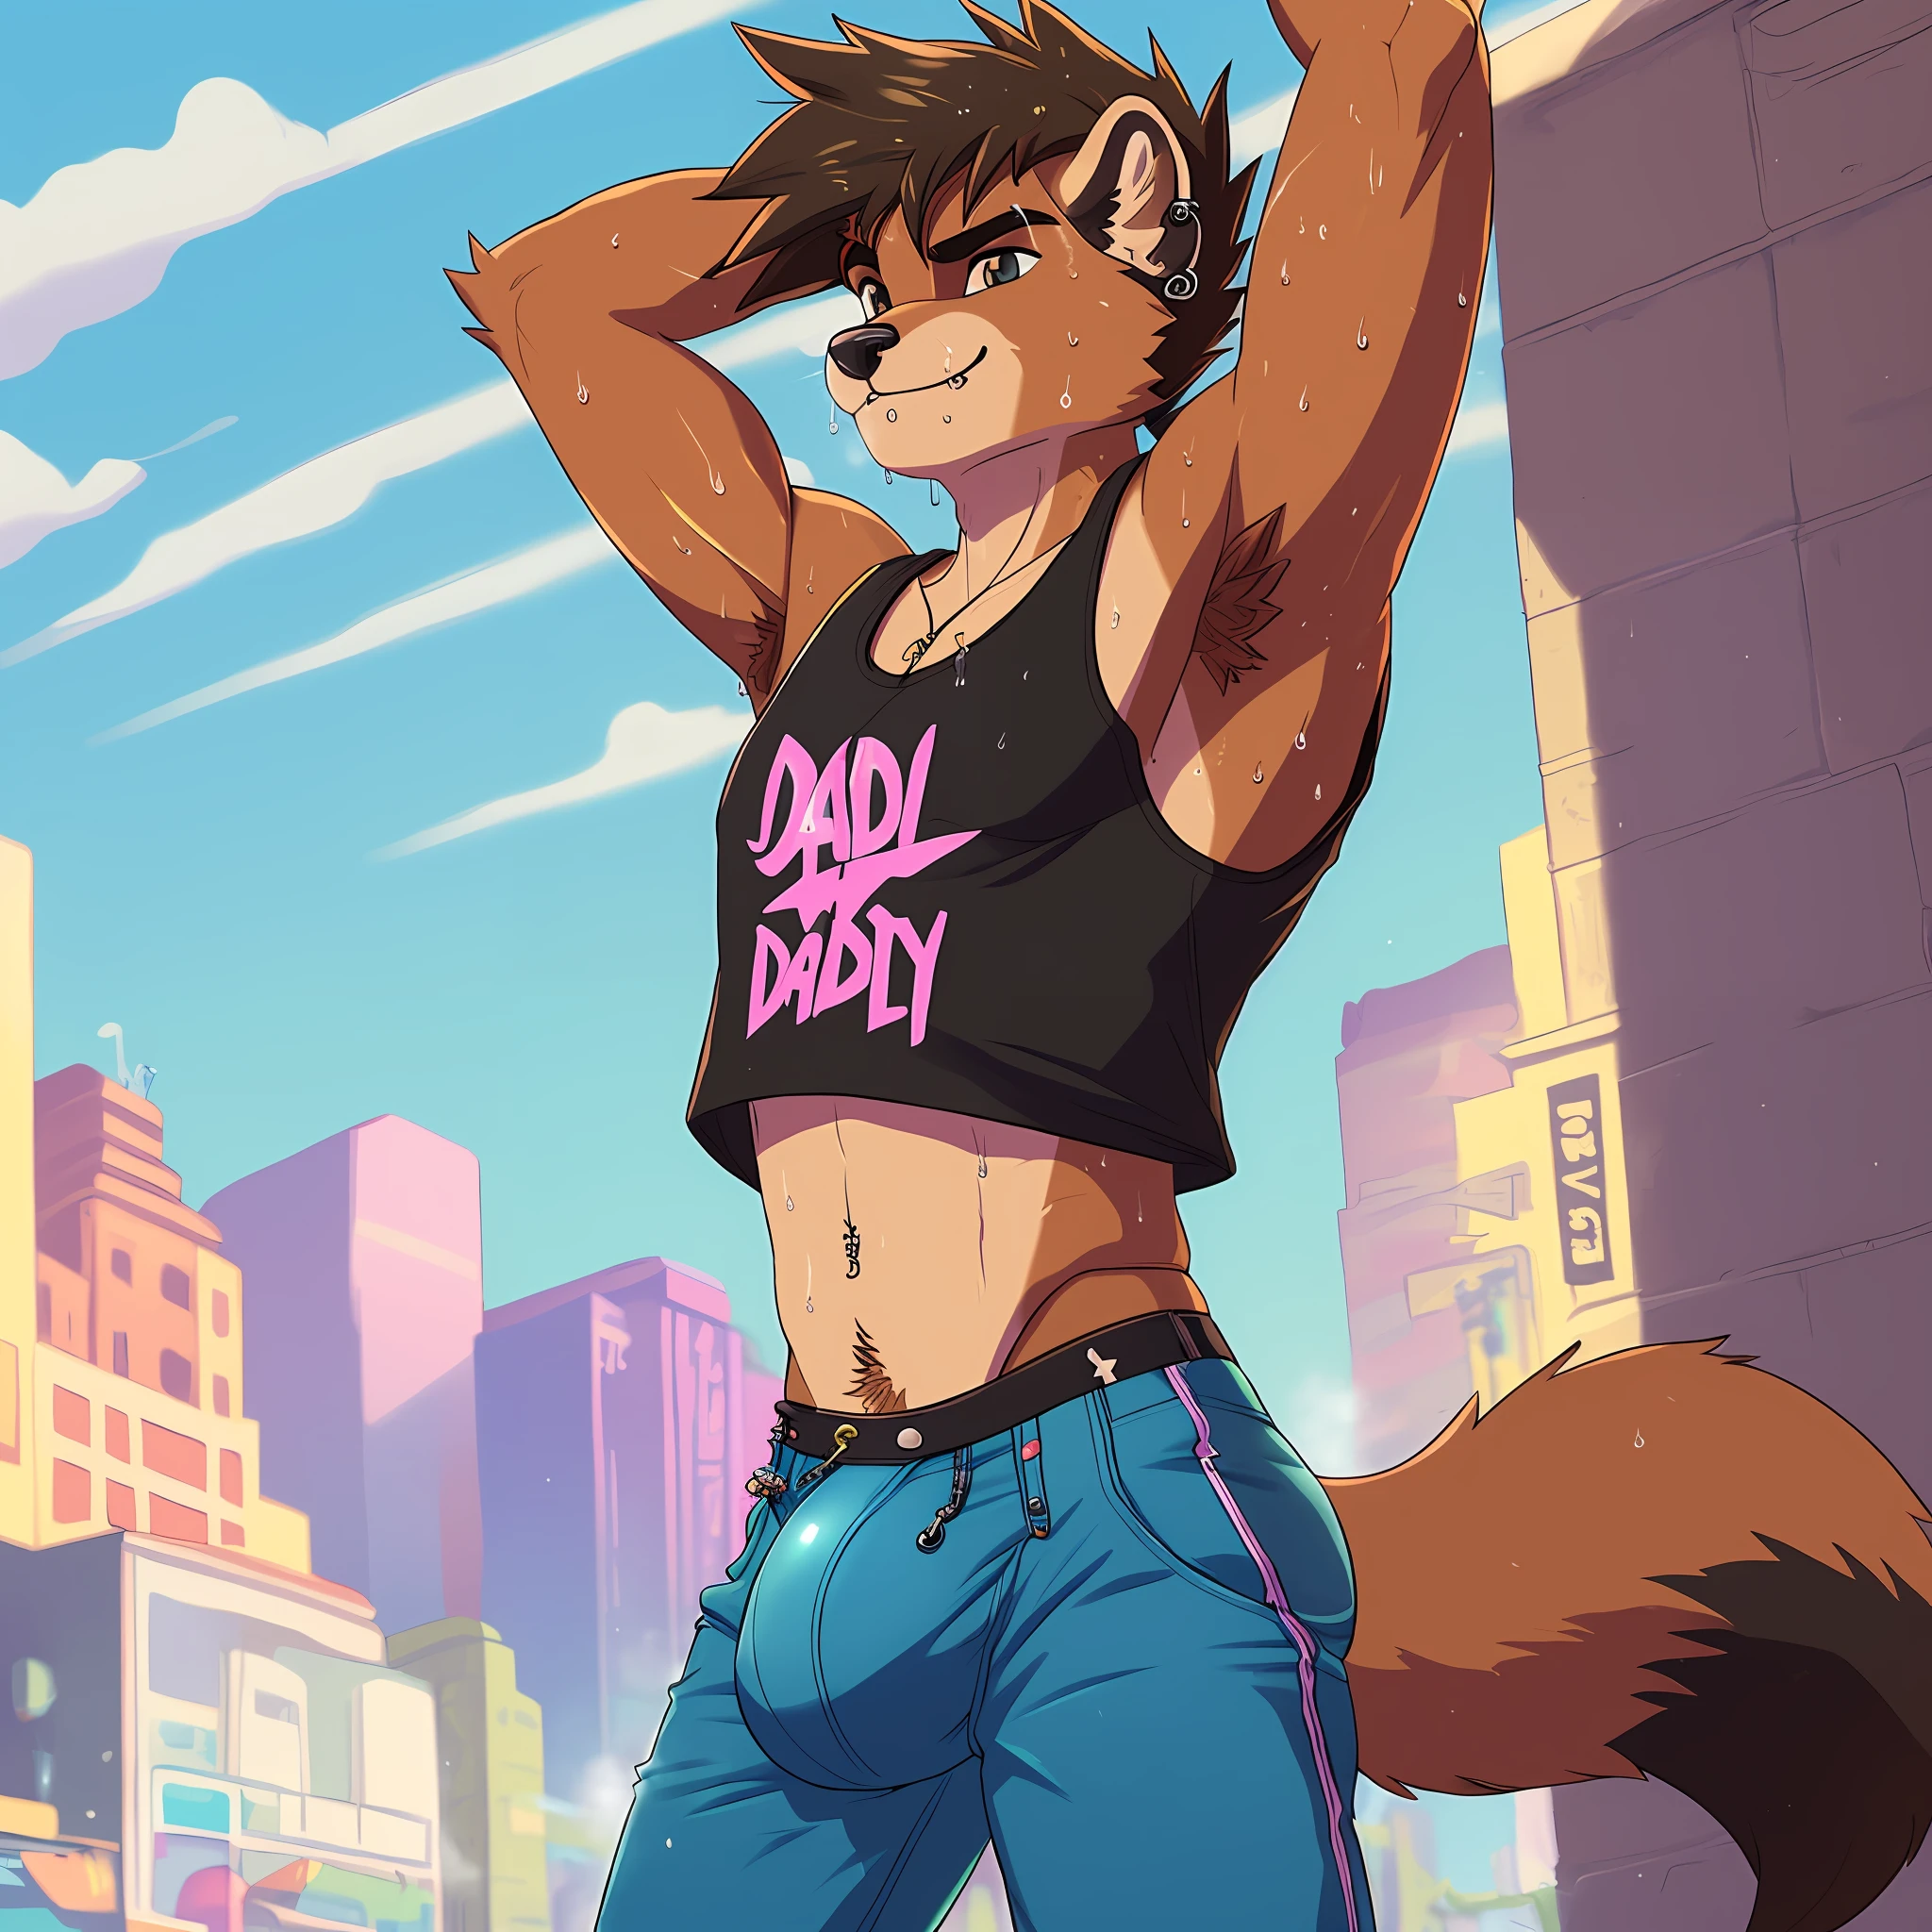 anthro, male, 1boy, solo focus, marten, skater punk, day, dim, detailed eyes, detailed clothes, thin, sleeveless top, sweaty armpits, raised arms, bare chest, fit, tall, extreme pants bulge, ((huge bulge)), daddy, ((sweat)), ((musk)), detailed nipple piercings, masterpiece